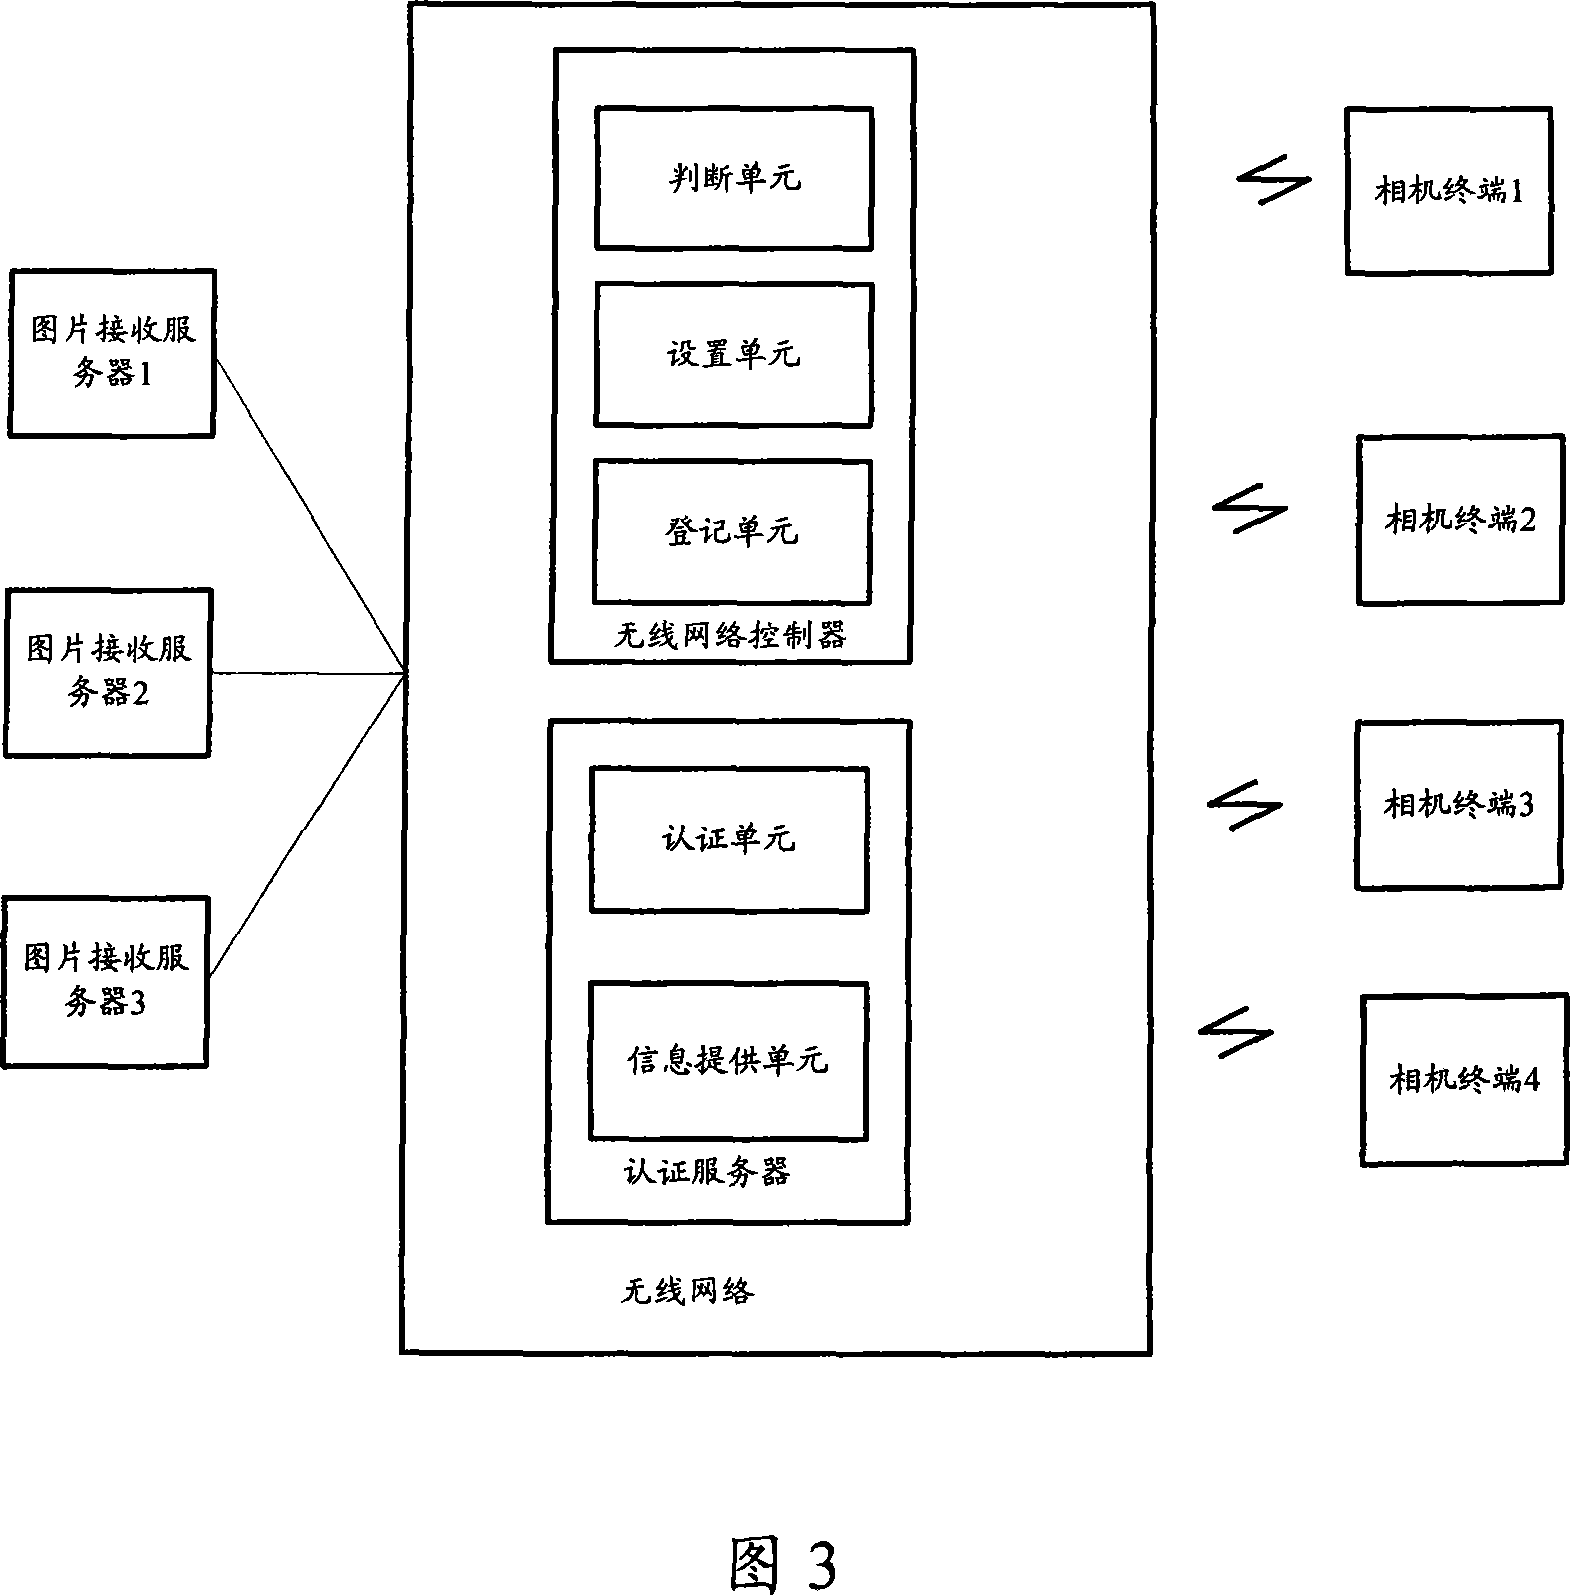 Apparatus, system and method for implementing business for transmitting as soon as shooting